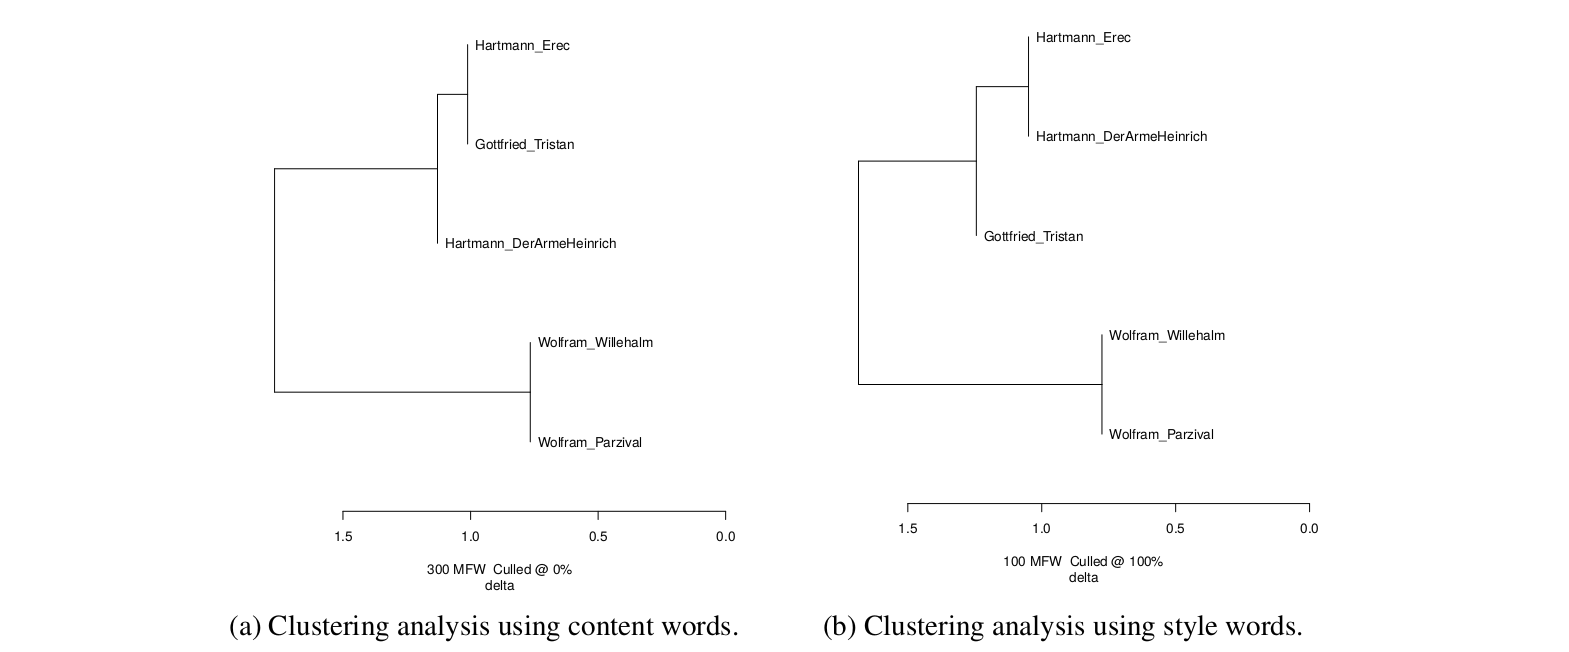 Figure 1: Comparison of different groups of high frequent words and their performance on a clustering task on MHG text by three different authors. Due to largely uniform editing of MHG text in the 19th century, normalisation can be neglected (Kragl, 2015).